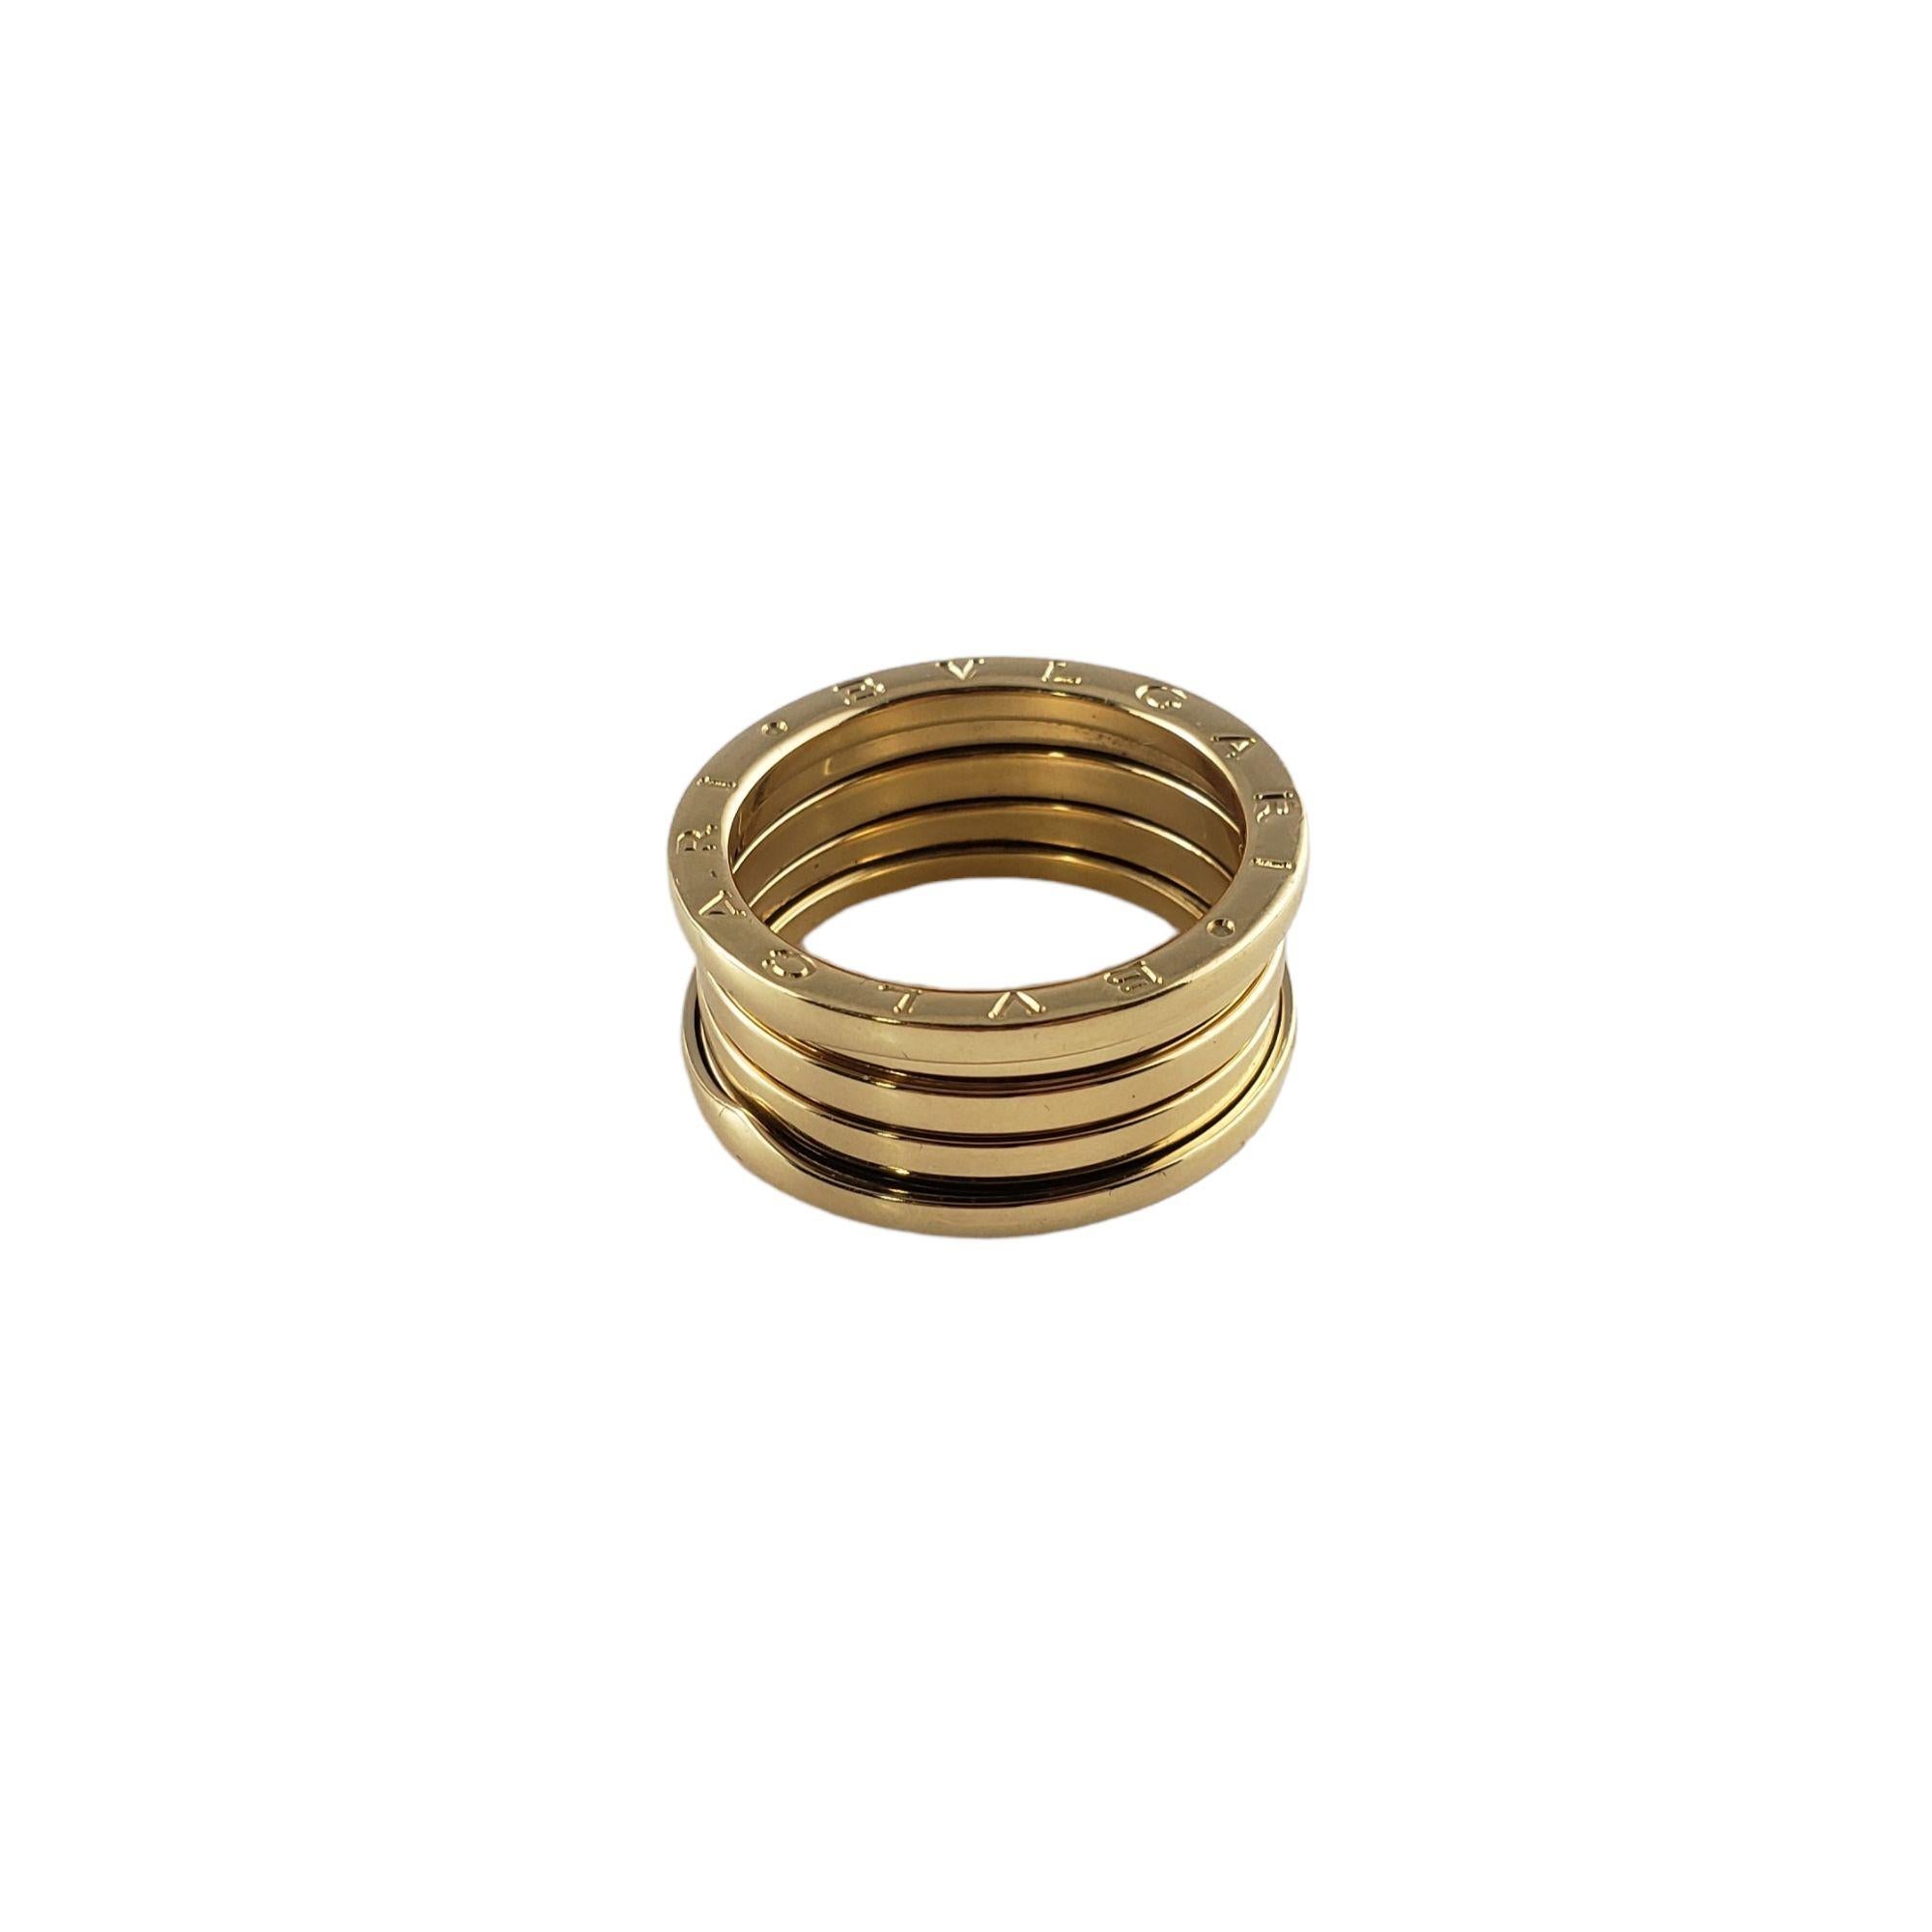 Vintage Bvlgari 18 Karat Yellow Gold B. Zero 1 Band Ring Size 9.75-

This stunning four band ring by Bvlgari draws its inspiration from the iconic Colosseum. Crafted in beautifully detailed 18K yellow gold. Width: 9 mm.

Ring Size: 9.75 /